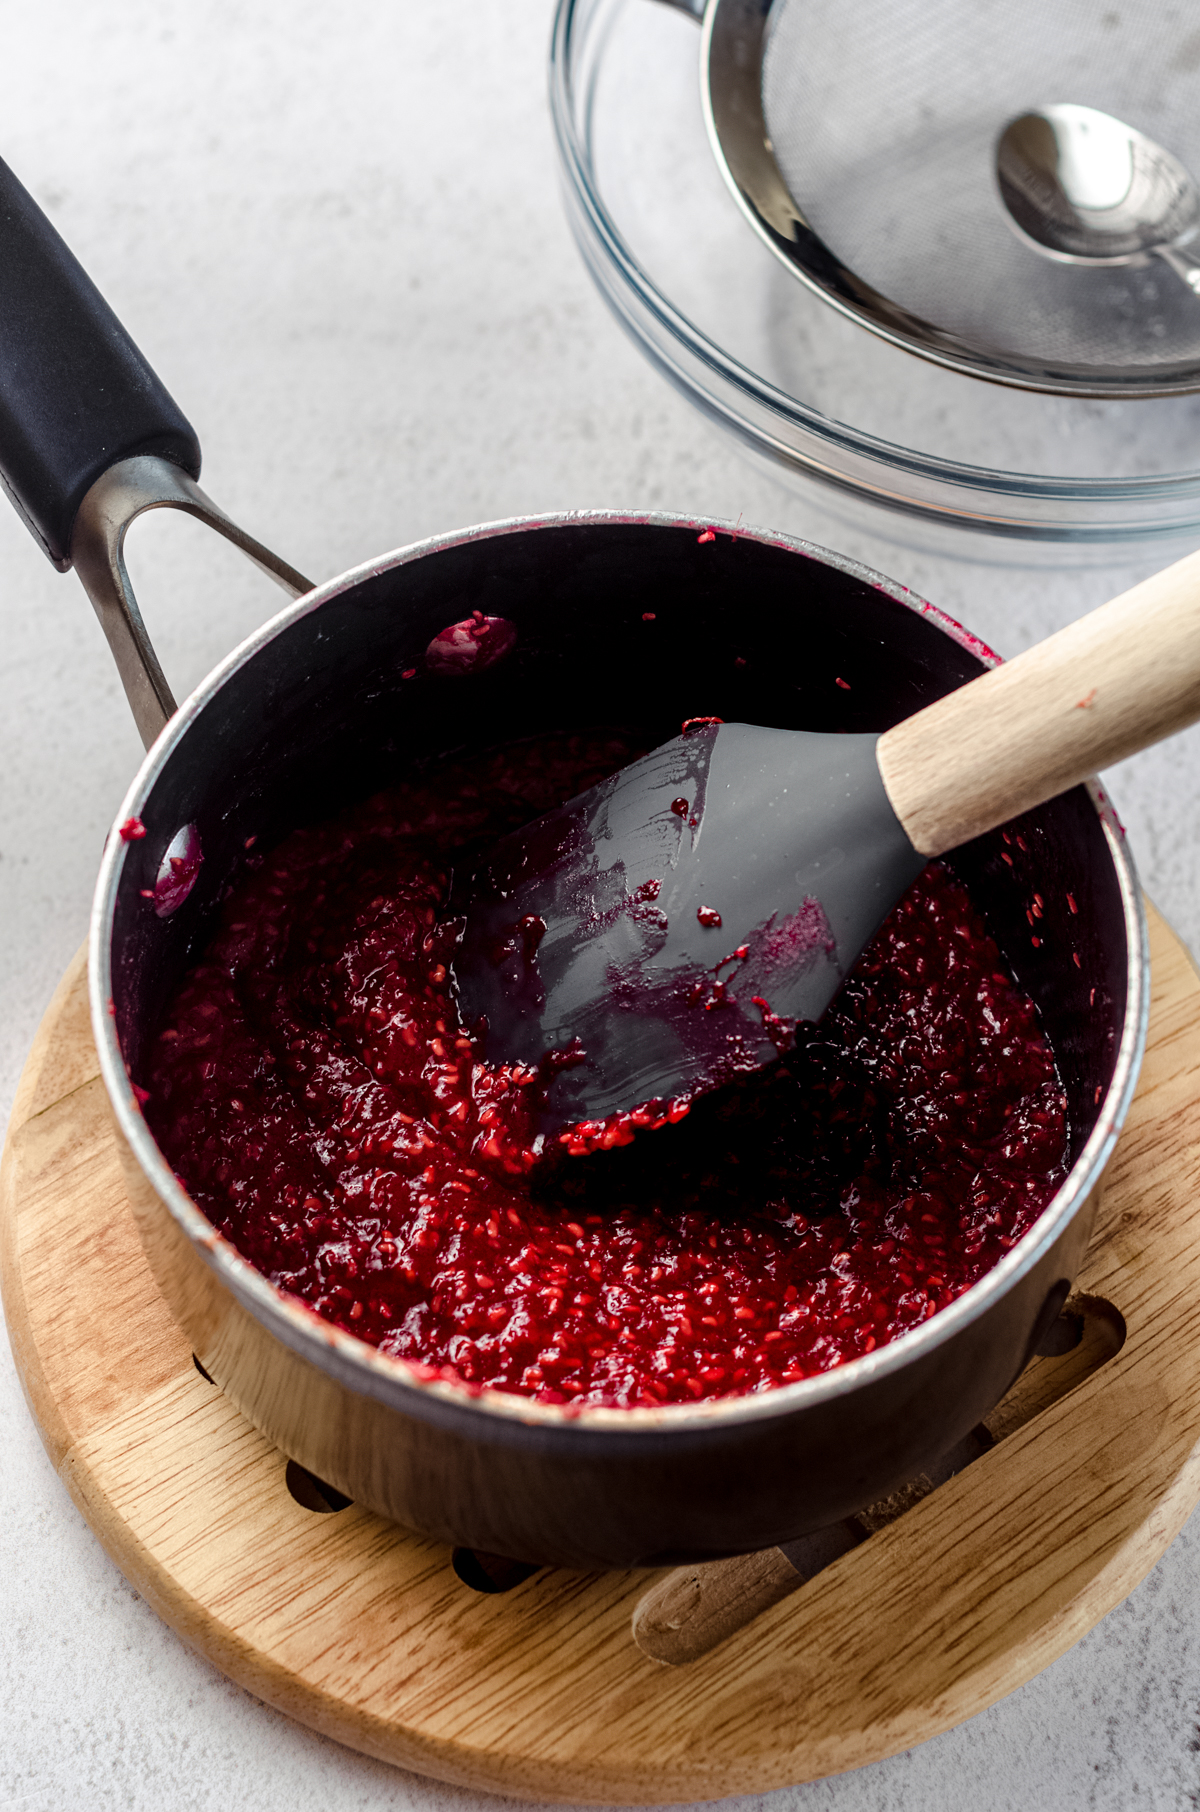 Cooked raspberry spread in a saucepan.